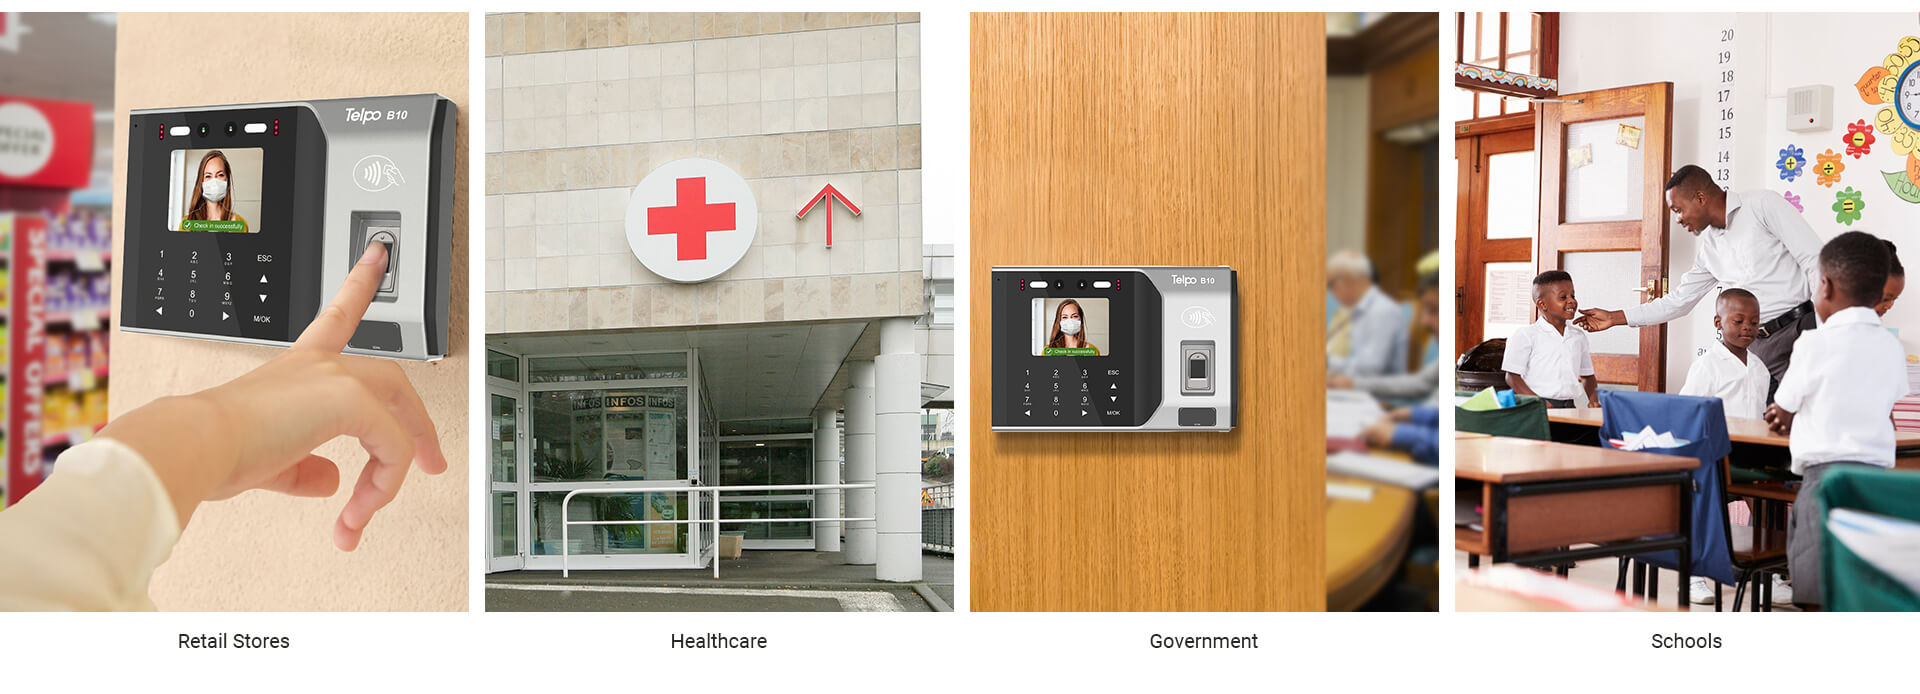 Time Attendance Access Control